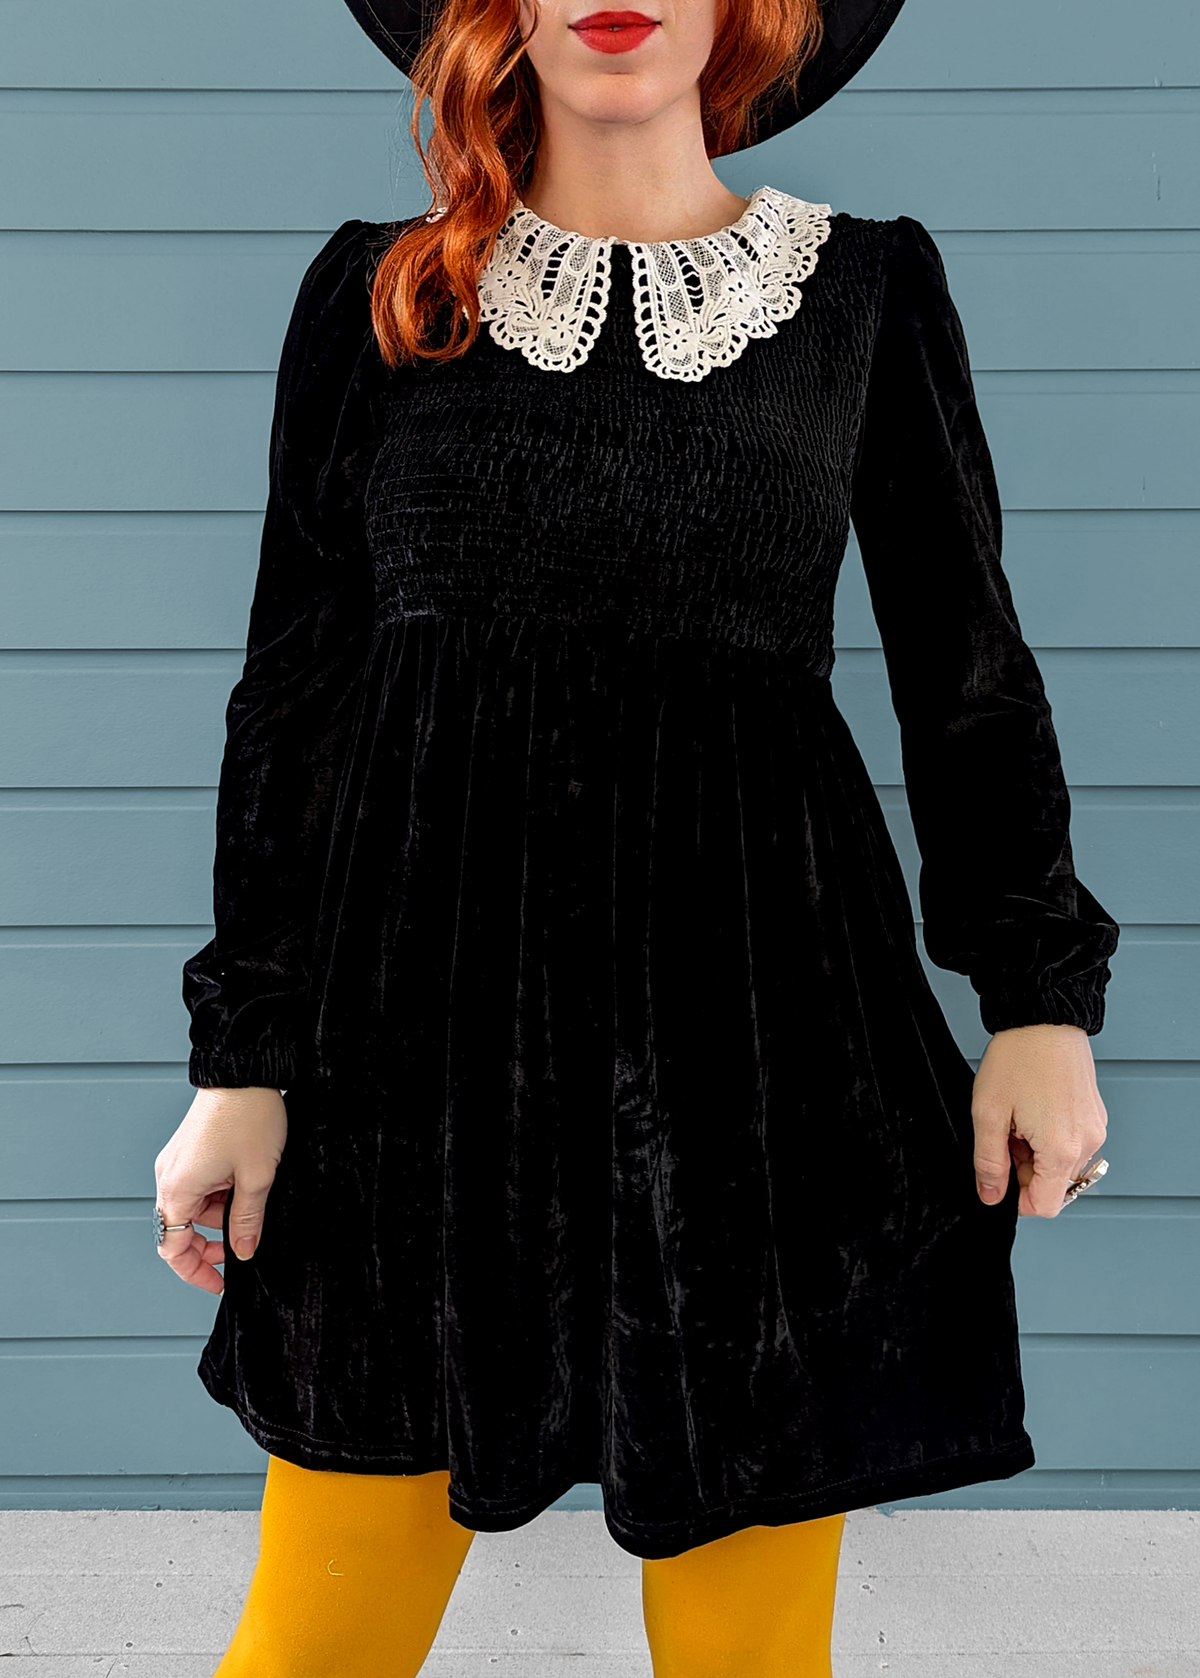 Daisy Street Wednesday Addams Doll Parts Black Velvet Babydoll Dress with smocked detailing and white lace collar. Giving 60s meets 90s vibes!